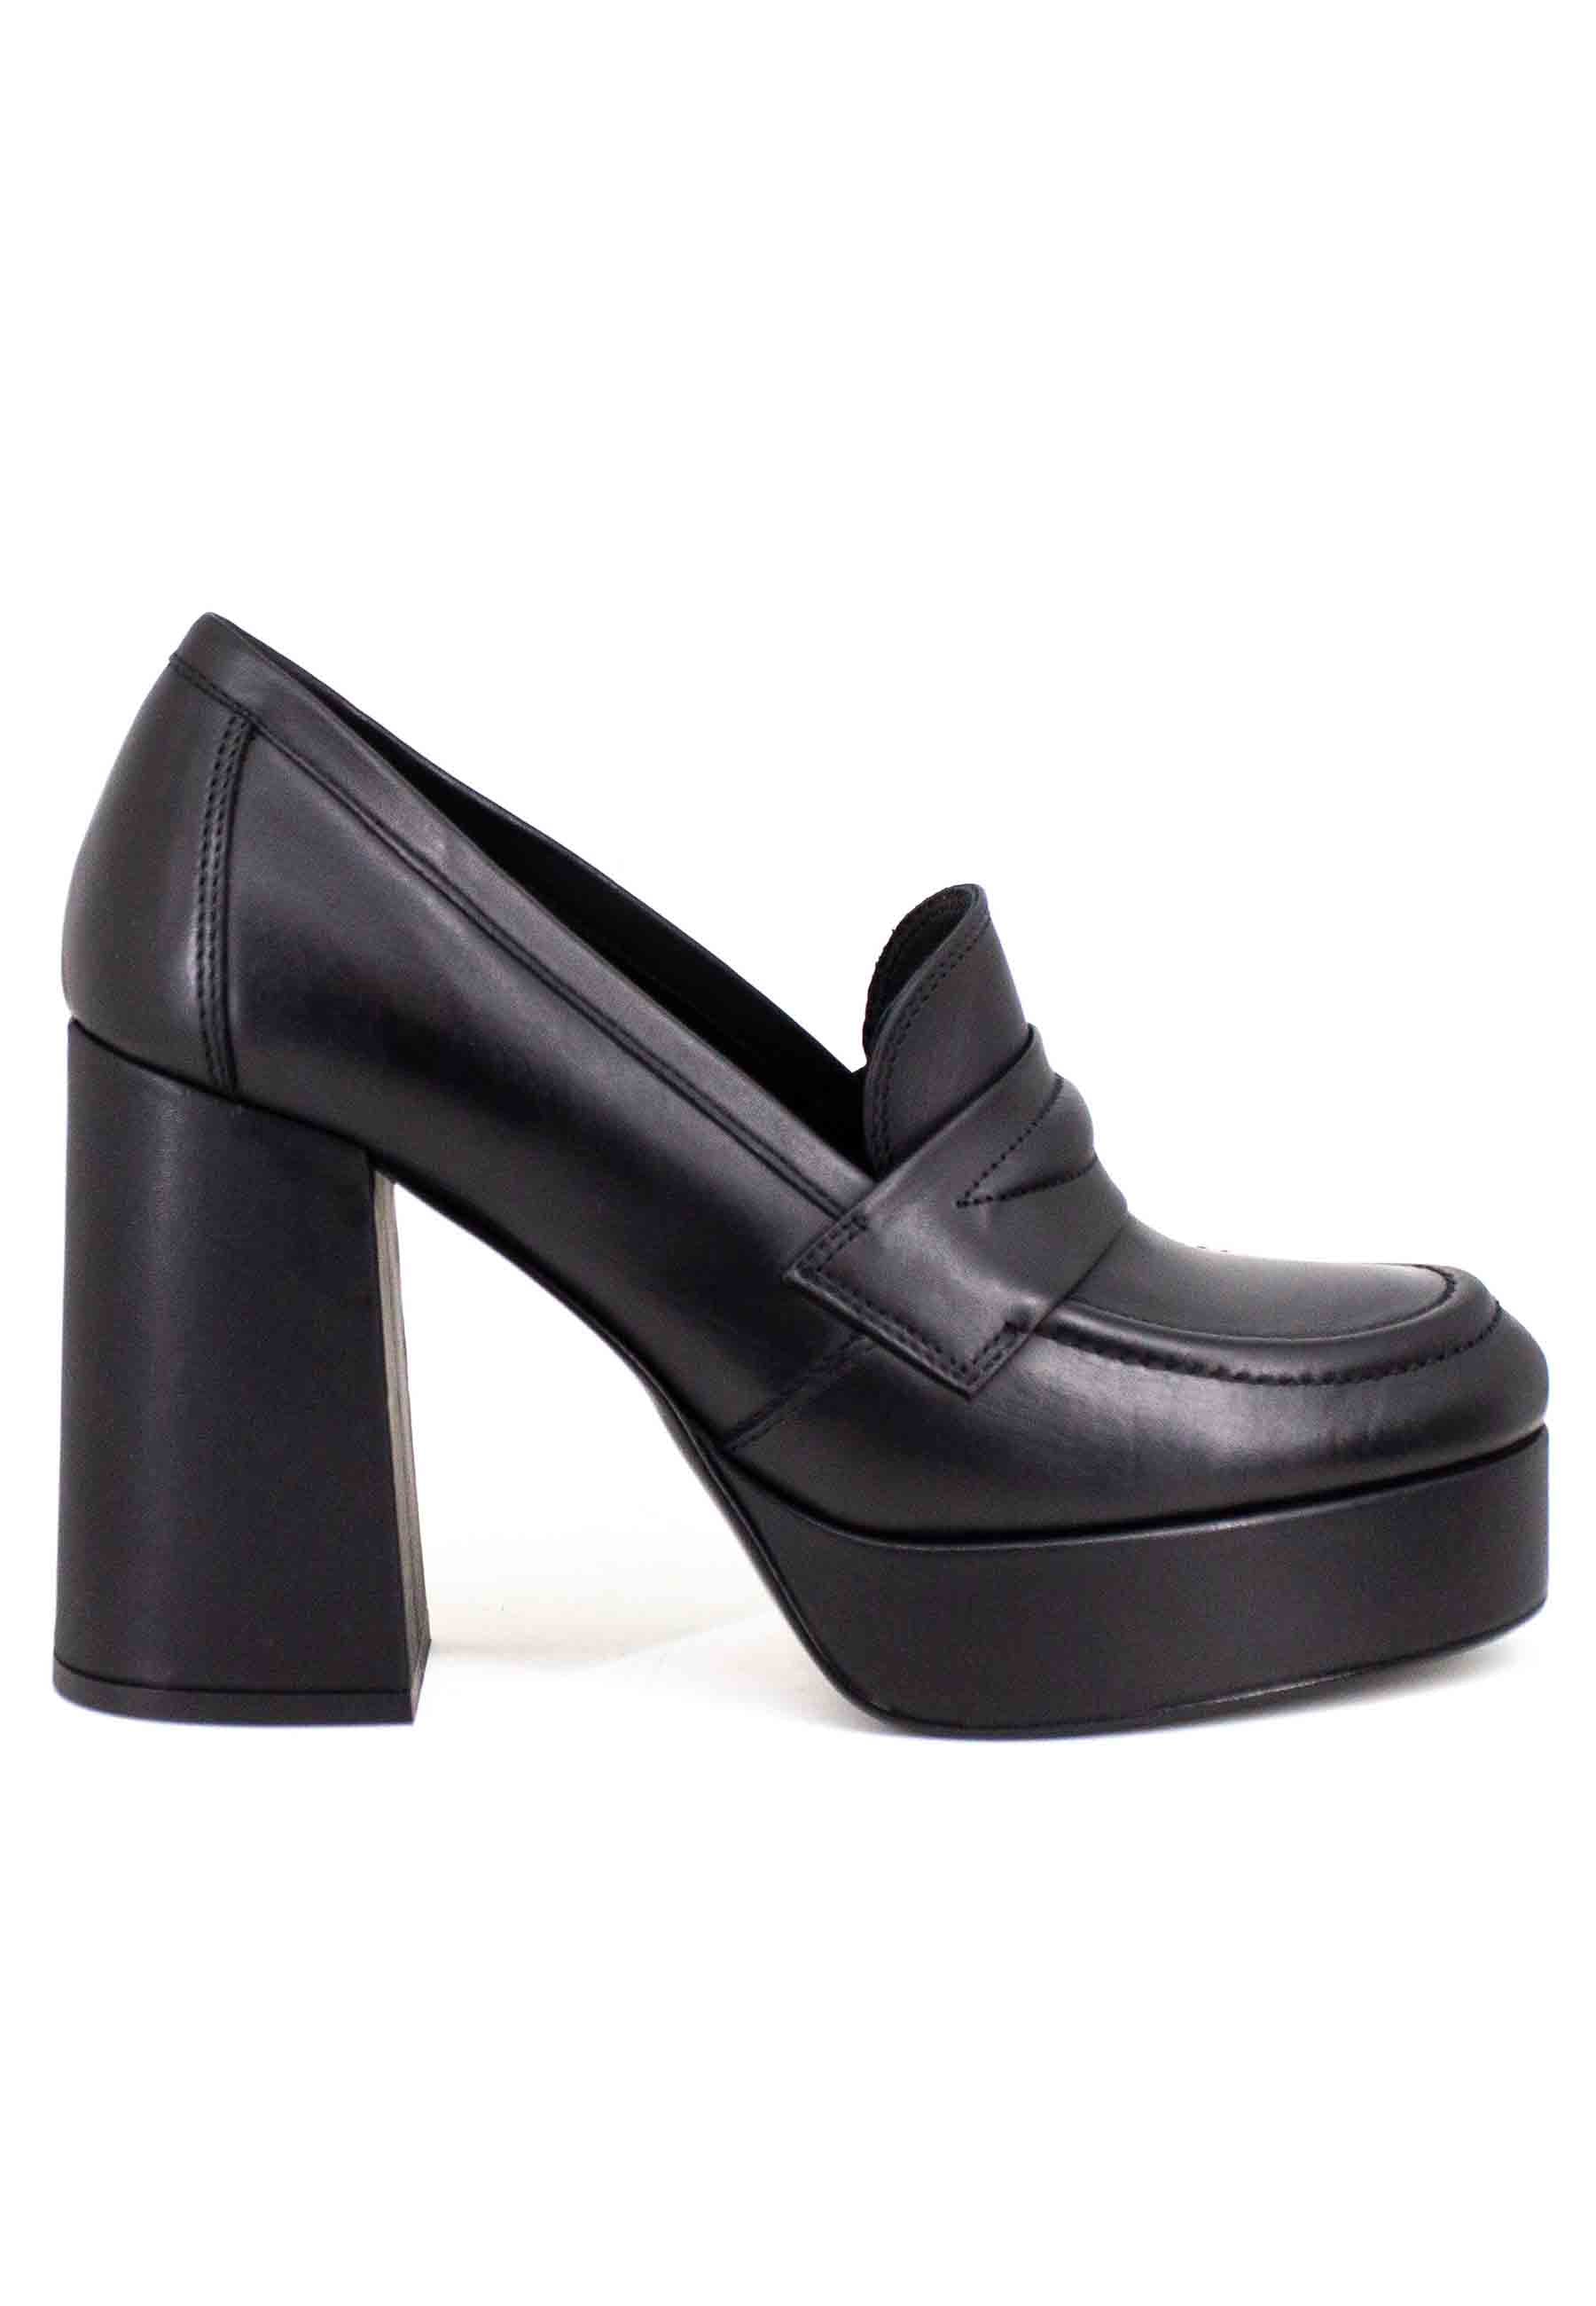 Women's black leather loafers with high heel and platform